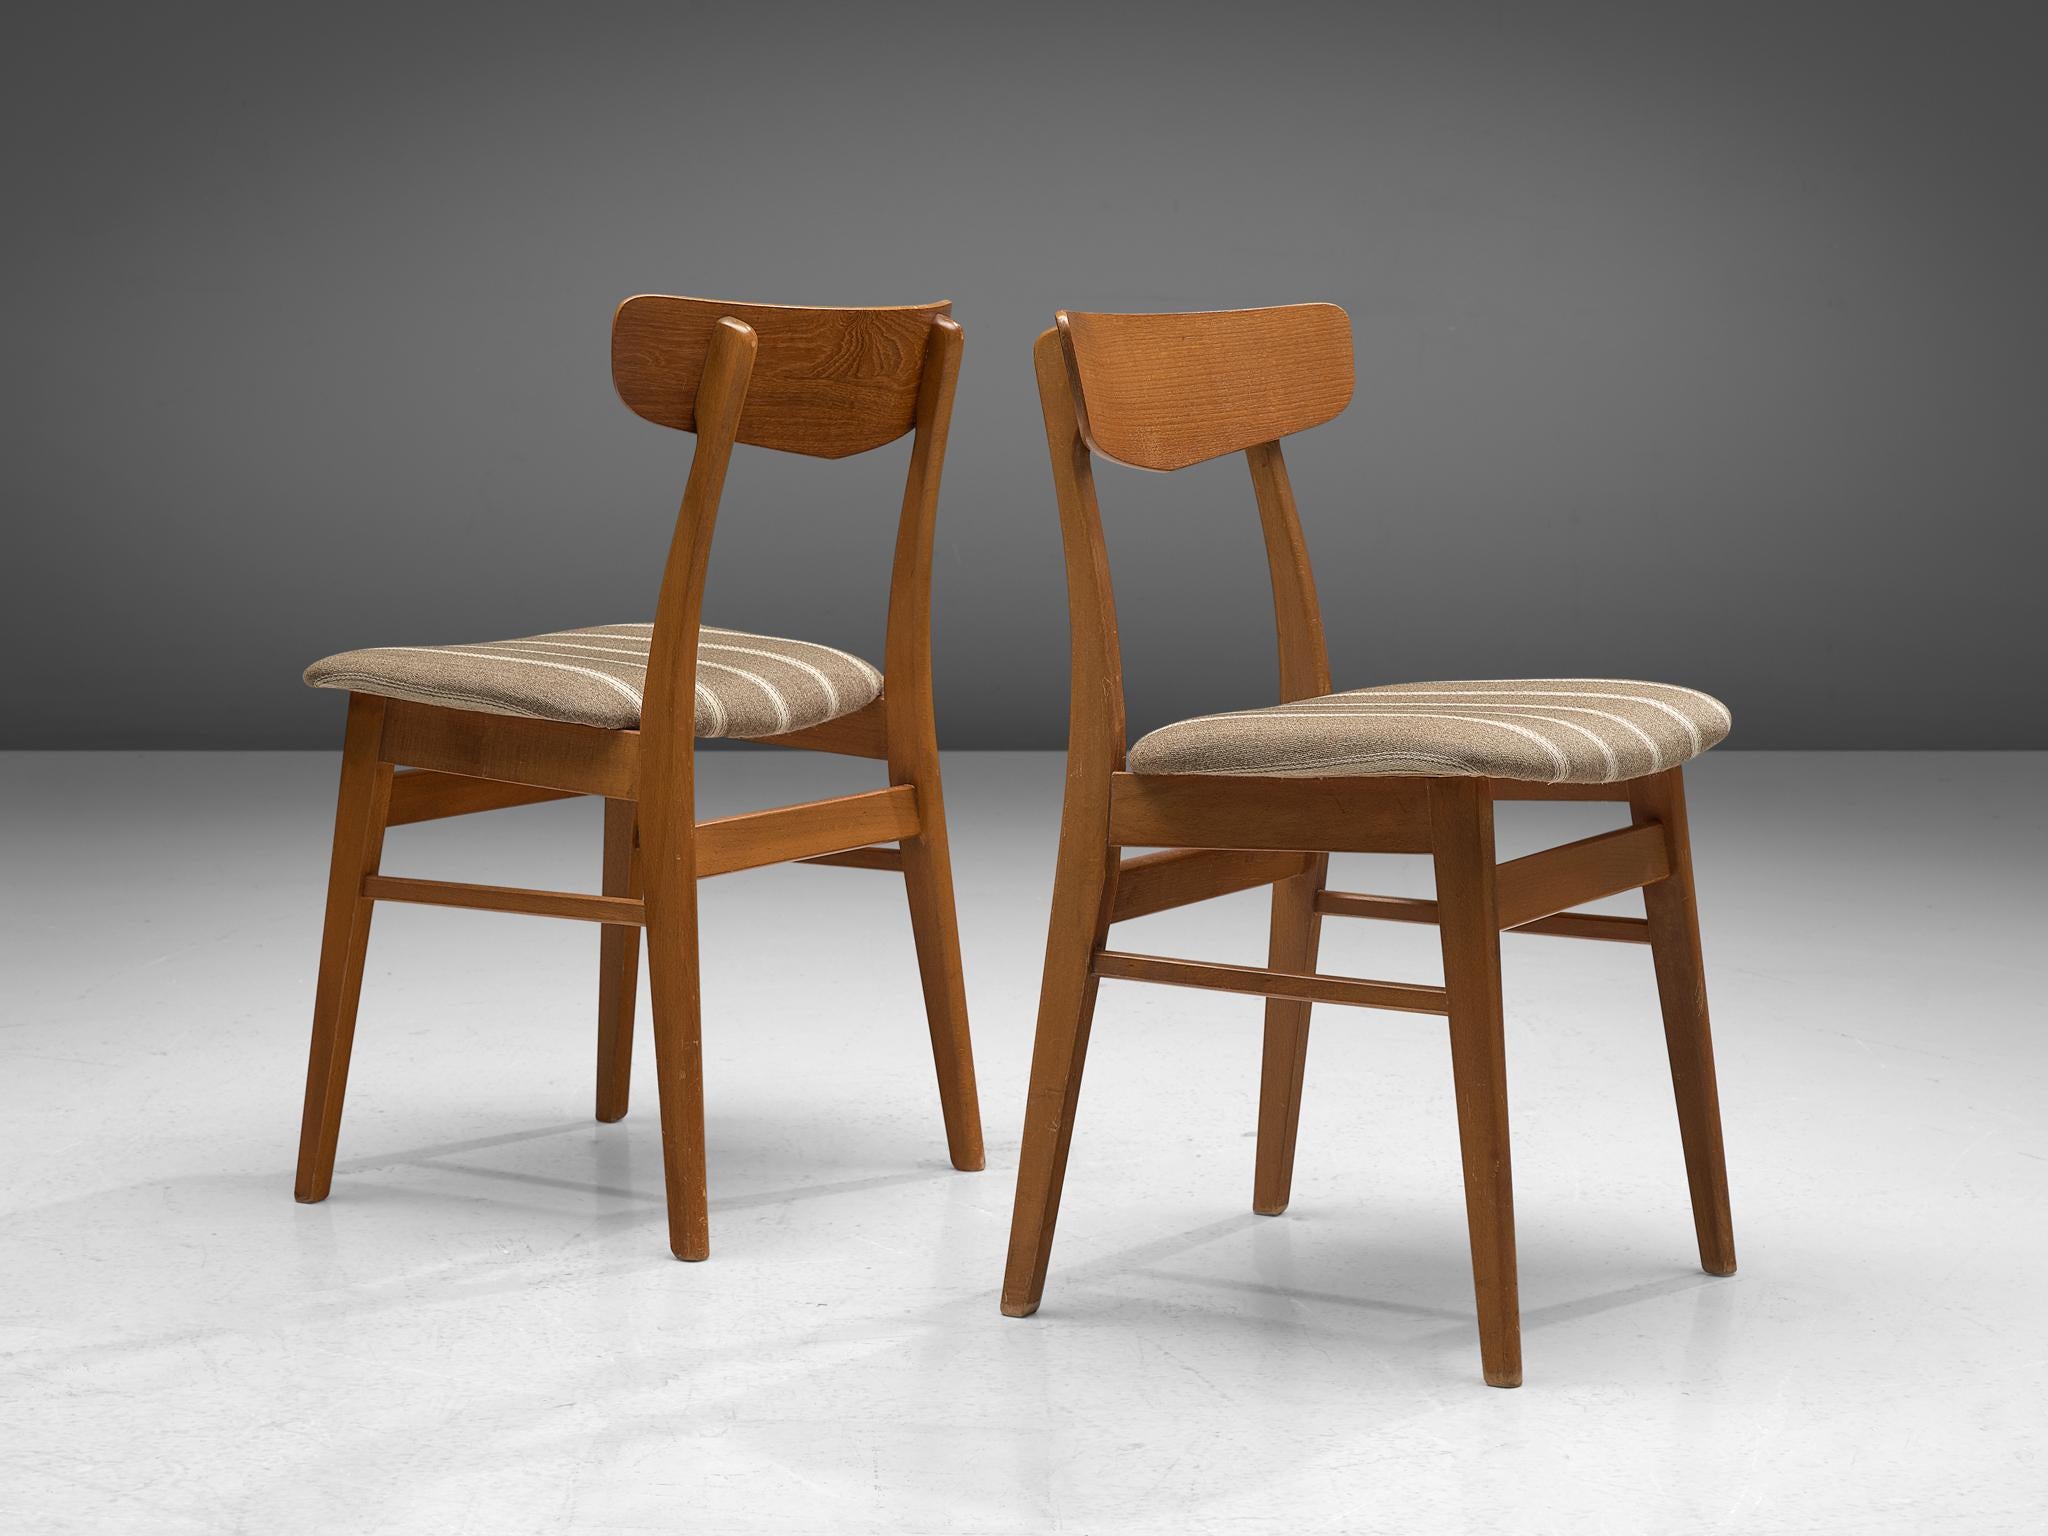 Fabric Danish Dining Chairs in Teak and Beige Striped Upholstery